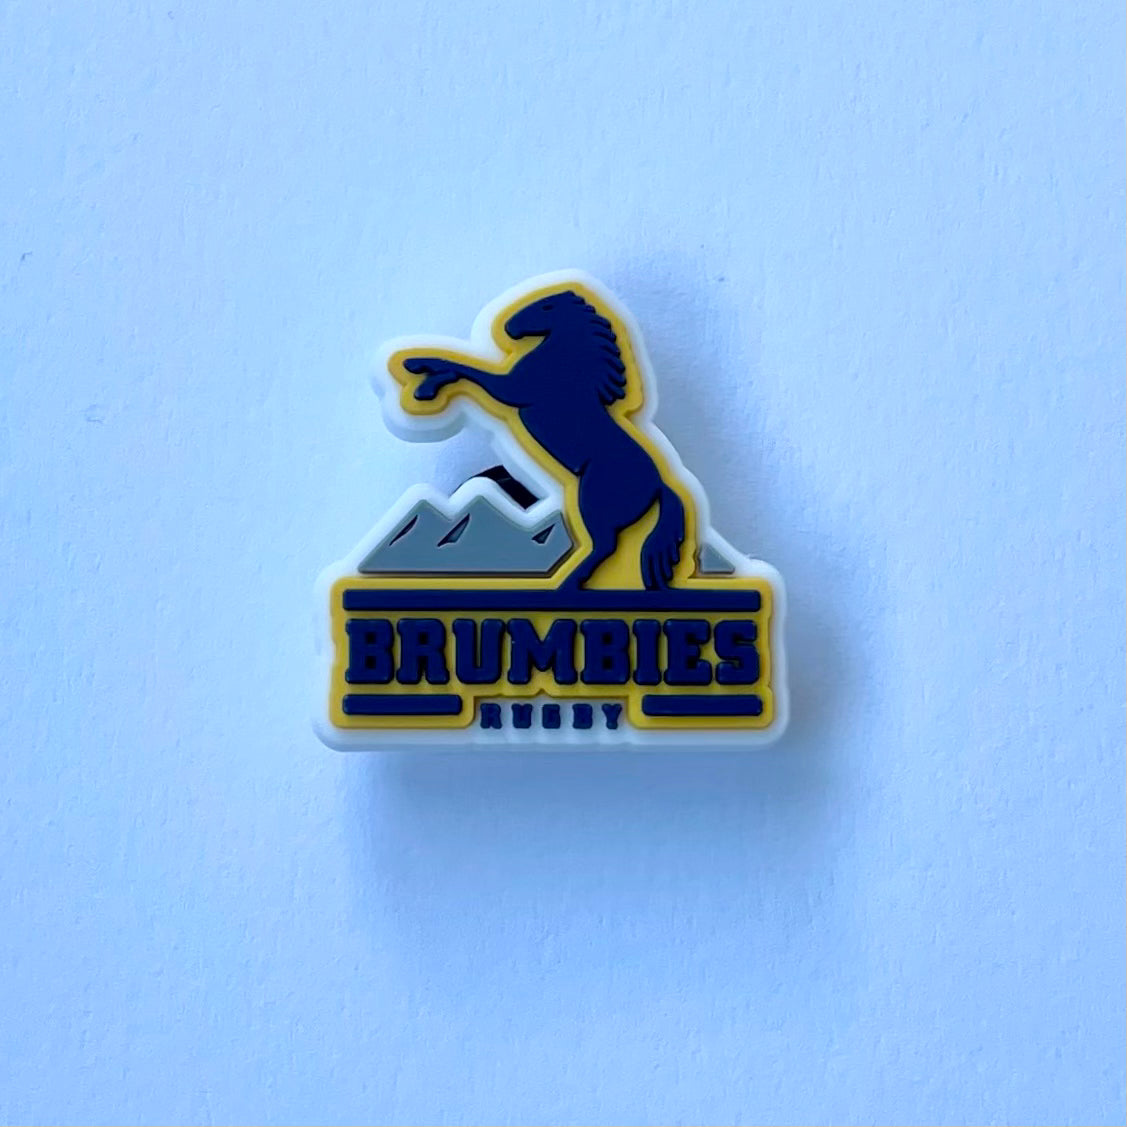 Brumbies Rugby Union Charm